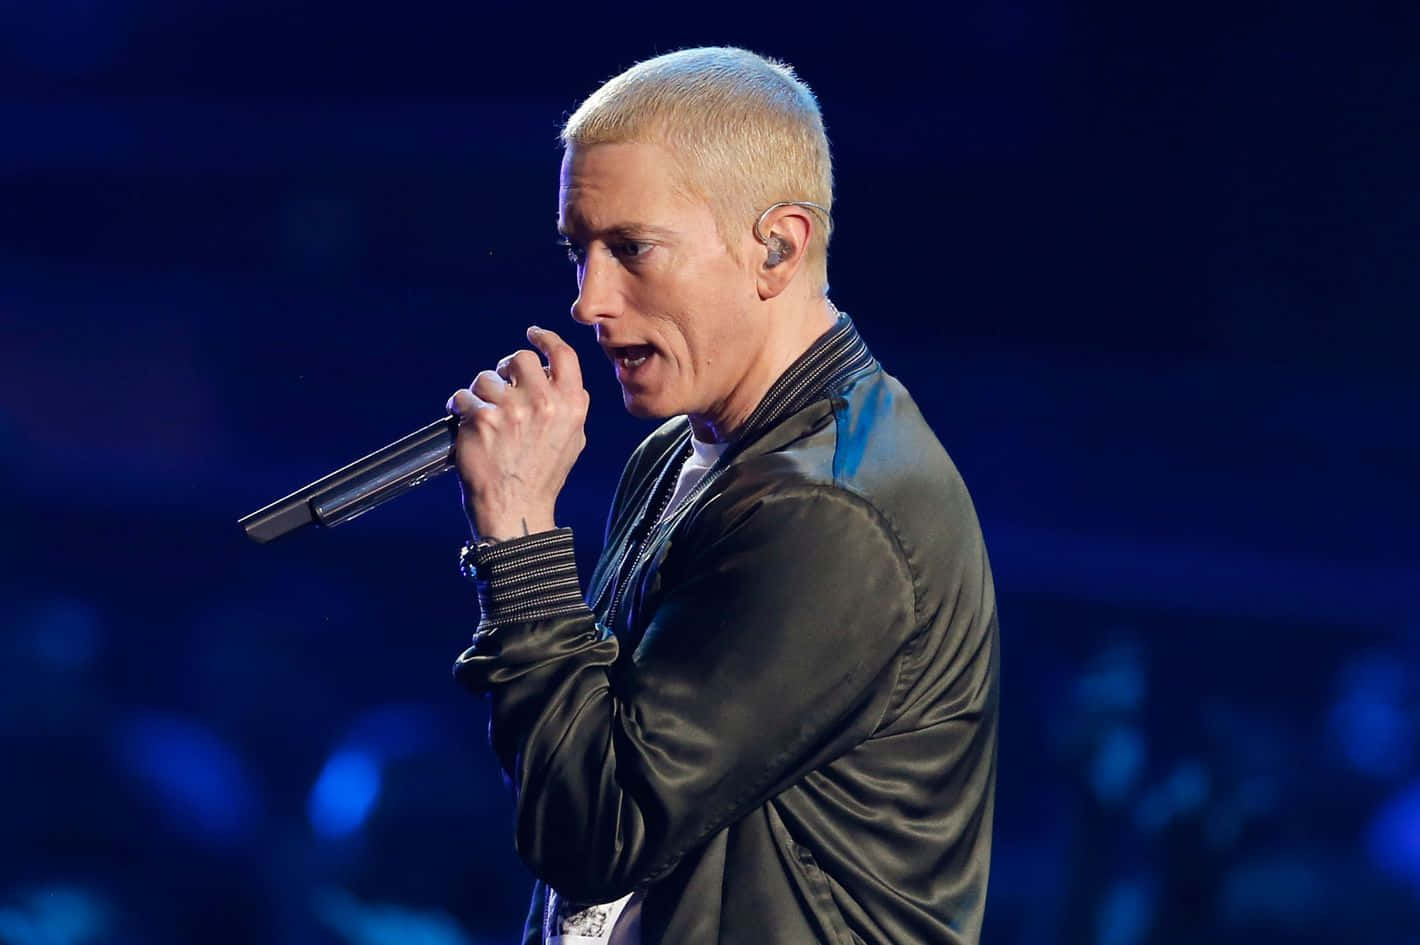 Eminem Performing Live on Stage with Energy and Passion